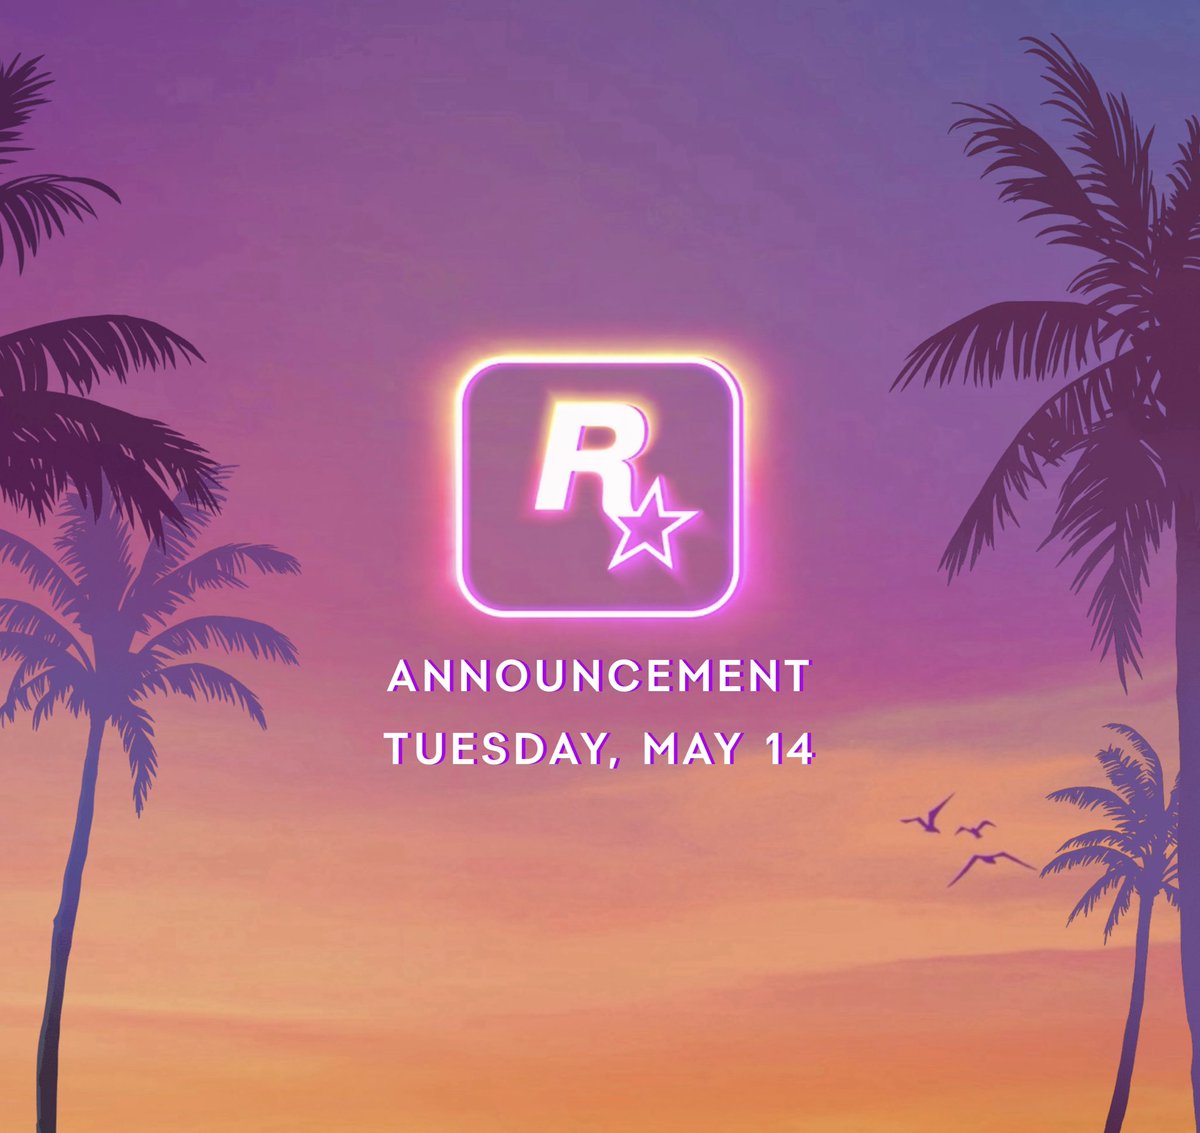 GTA 6 ANNOUNCEMENT ON MAY 14TH!? ⁉️ 

People are SPECULATING that Rockstar will be dropping an announcement tomorrow, & here are some things we could possibly see.

- Screenshots & possibly the cover art
- info on pre-orders
- Trailer 2 announcement date 
- Logo change